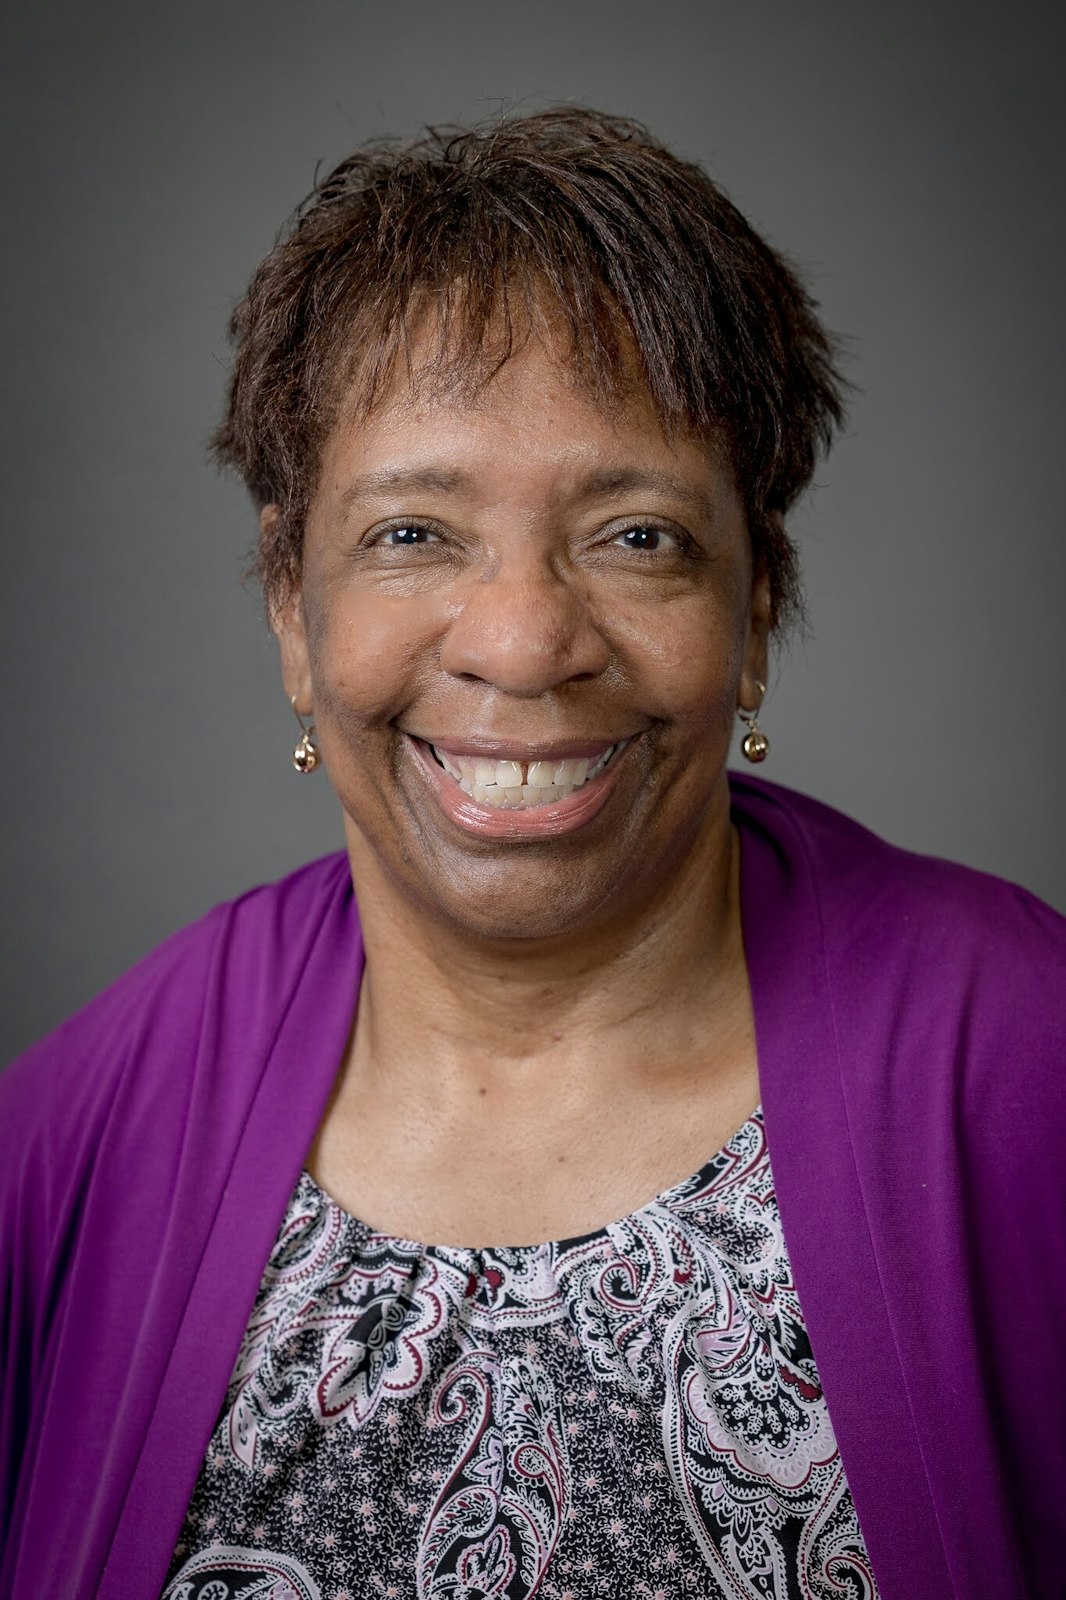 Pamela Scales was hired to serve as the full-time associate superintendent for finance and federal programs, which previously was a part-time position.